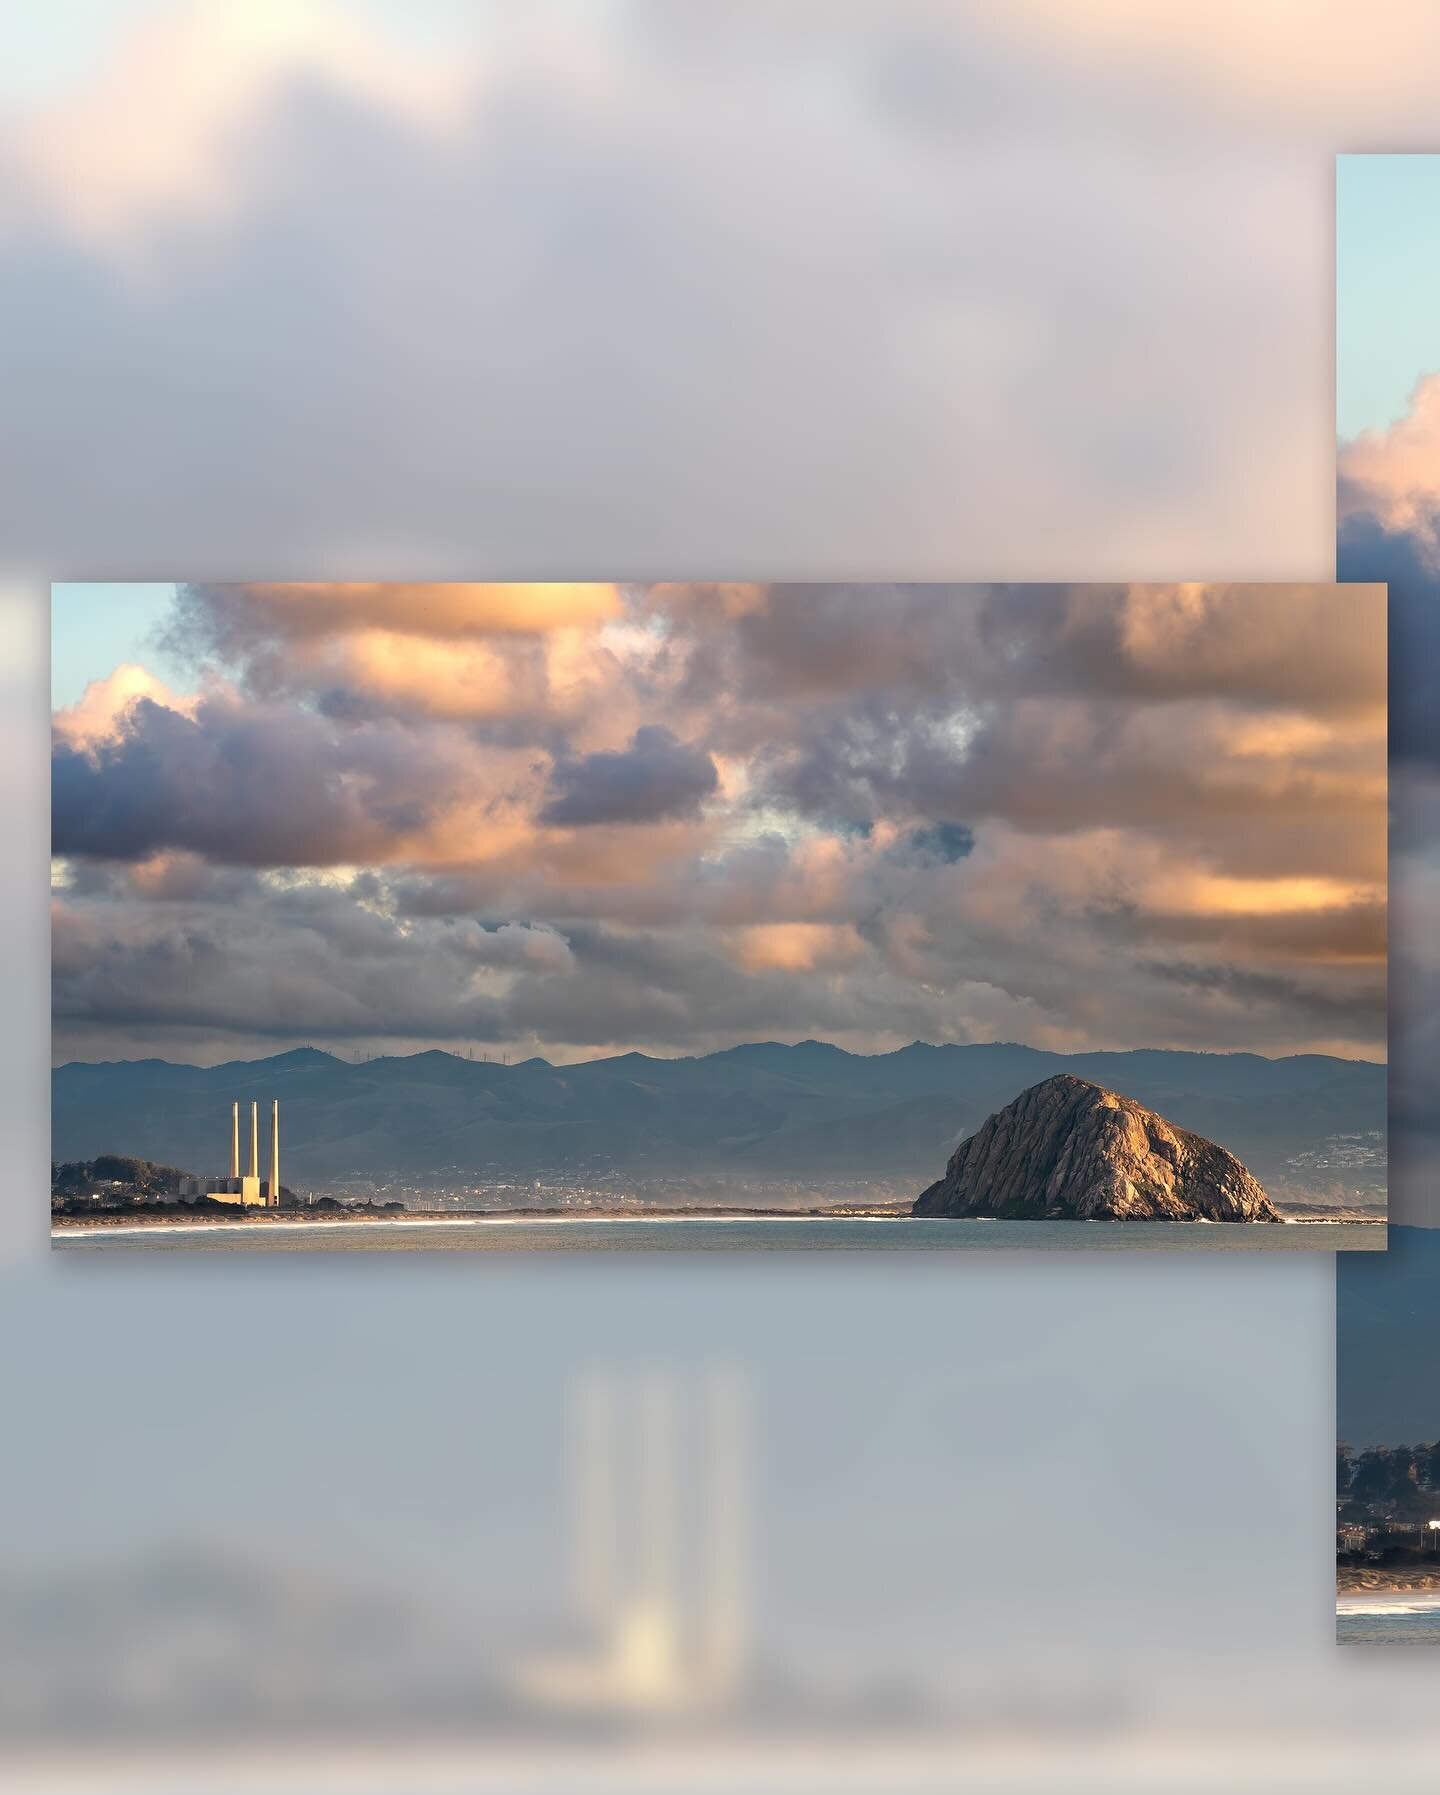 Did you know that Morro Rock is a volcanic plug that sits at the mouth of Morro Bay harbor? It&rsquo;s 581 ft tall and is one of 13 plugs that stretch inland. Thanks Wikipedia!
.
.
.
.
#siteyoursources #sanluisobispocounty #morrobay #cayucos #morroba